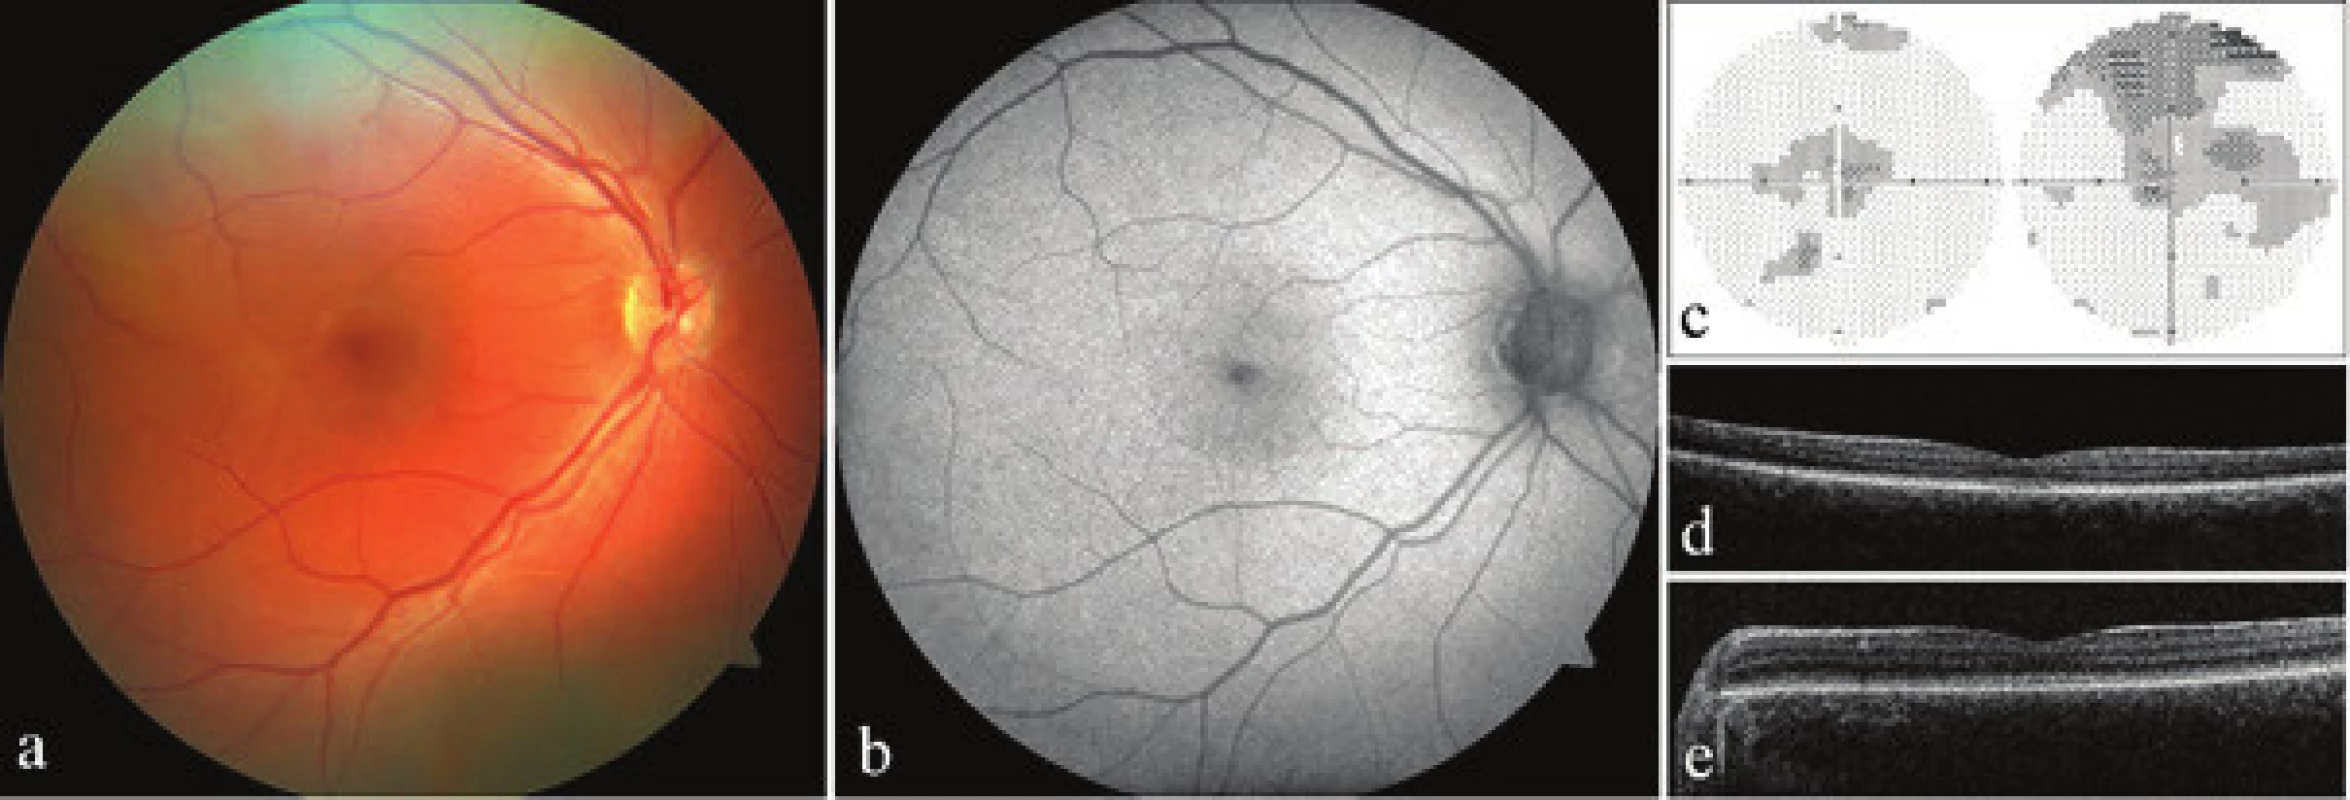 Clinical finding in both probands with achromatopsia. a) photograph of fundus of right eye of proband 1, b) autofluorescence
of fundus of right eye of proband 1, c) perimeter of right and left eye of proband 1, d) optical coherence
tomography with spectral domain (SD-OCT) of left eye of proband 1, d) SD-OCT of left eye of proband 2